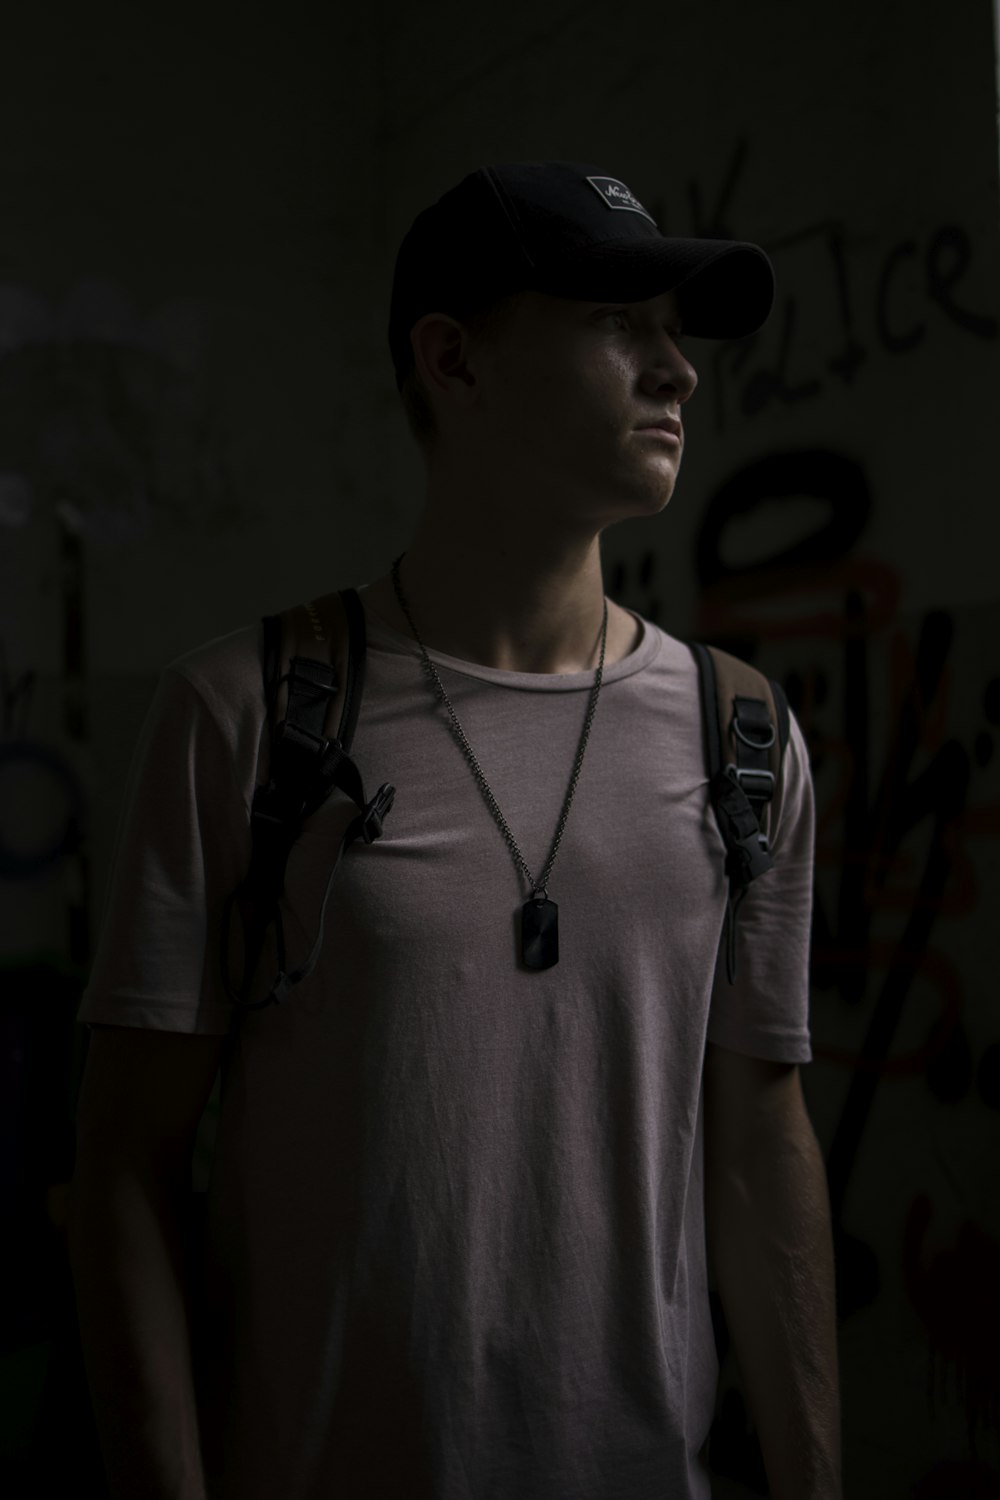 man wearing white T-shirt and backpack standing in a dark lit room